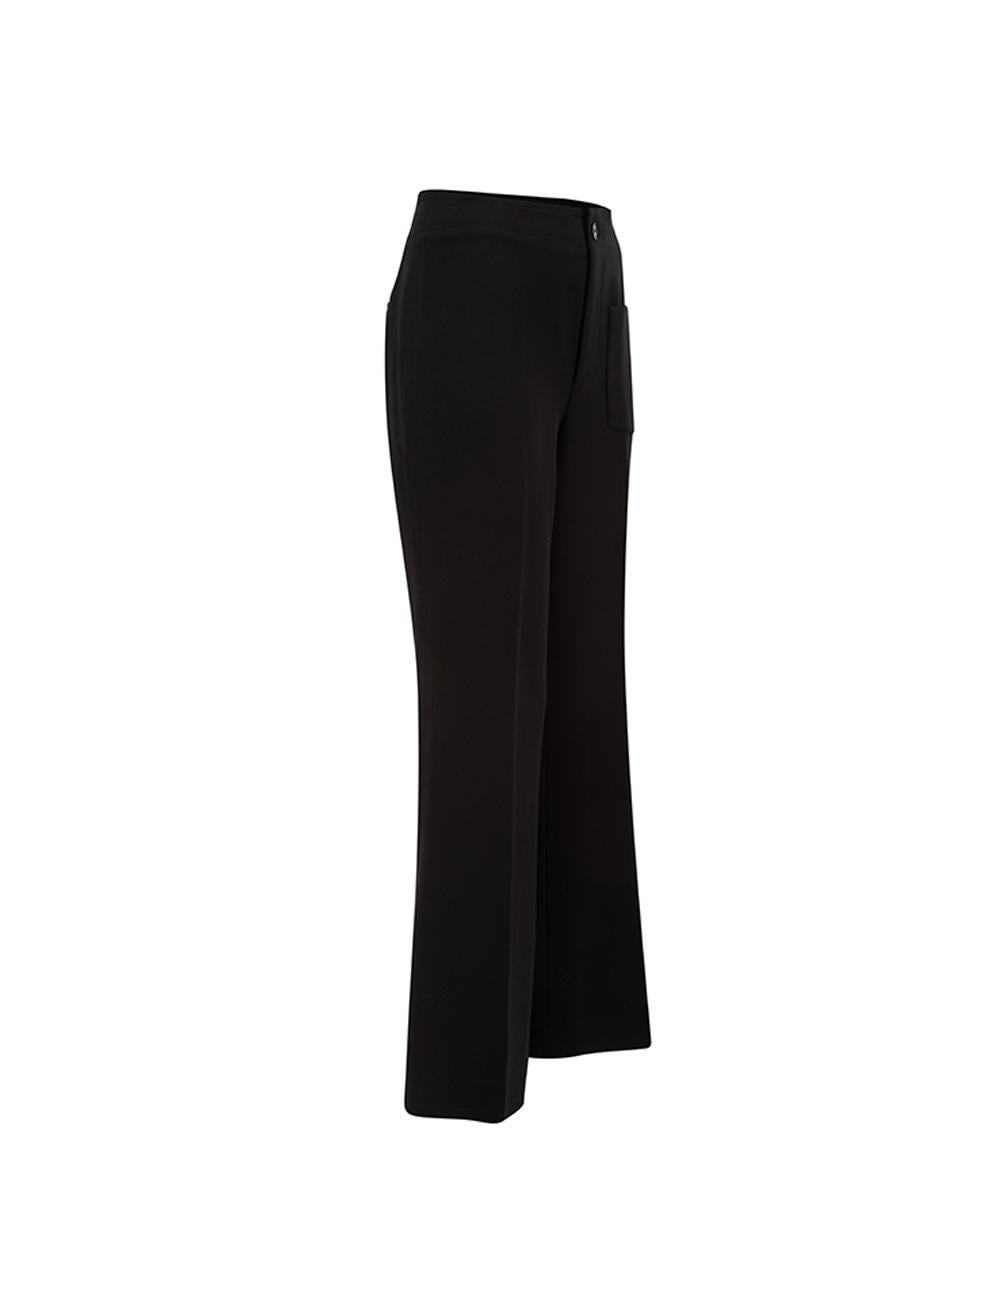 CONDITION is Very good. Minimal wear to trousers is evident. Minimal wear to exterior fabric on this used Helmut Lang designer resale item.  Details  Black Polyester Straight leg trousers High waisted Ankle length Frayed hems Front zip closure with